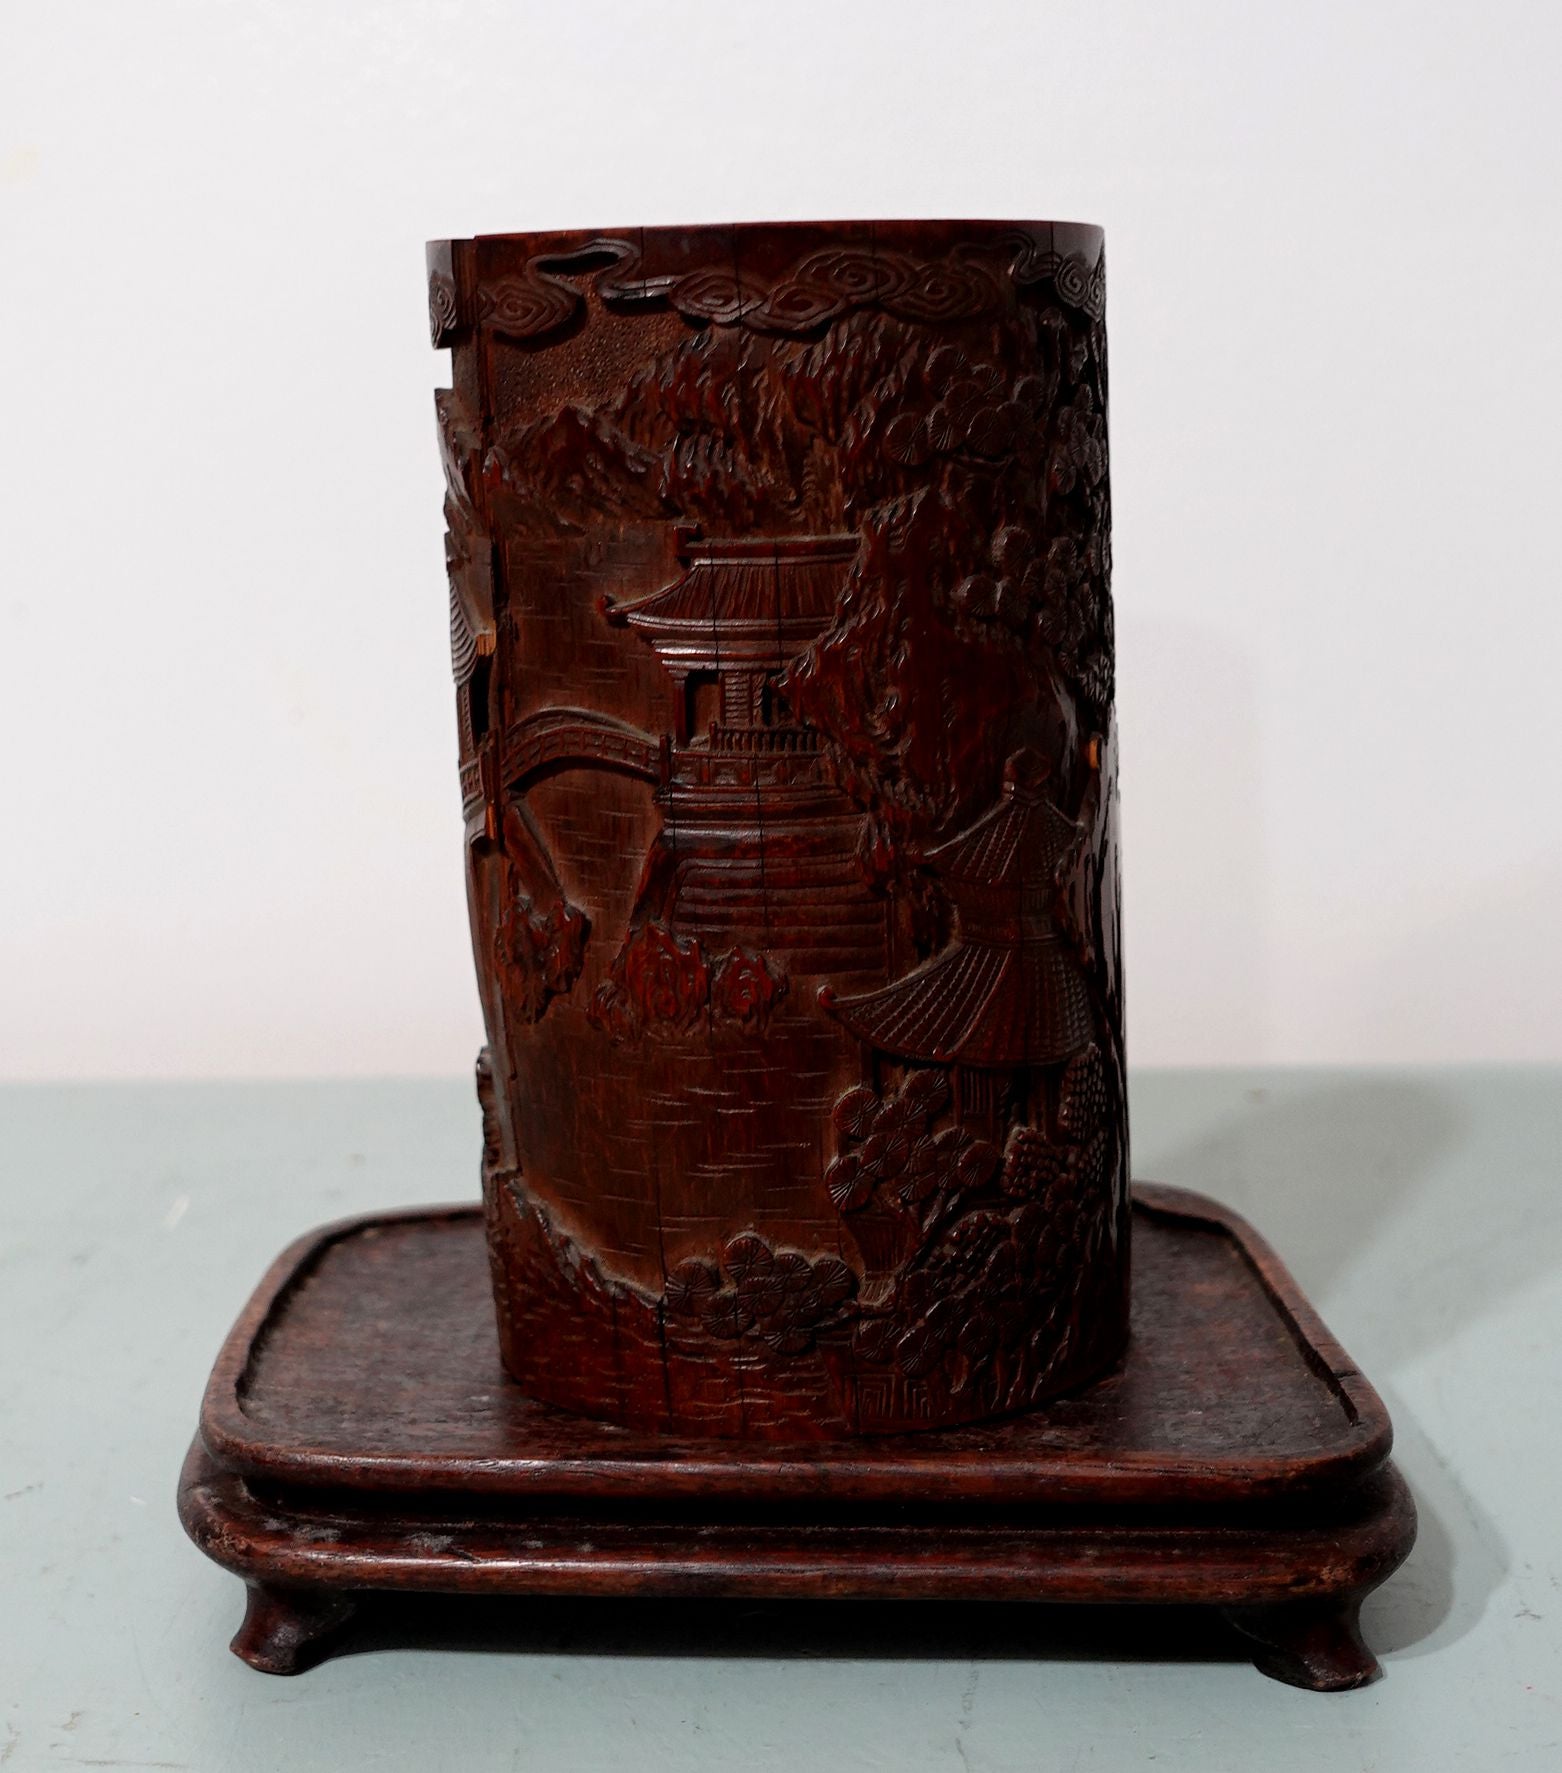 Antique Chinese Carved Bamboo Brush Pot from 18th to the early 19th Century with wood stand.
An amazing sophisticated design and carving details.